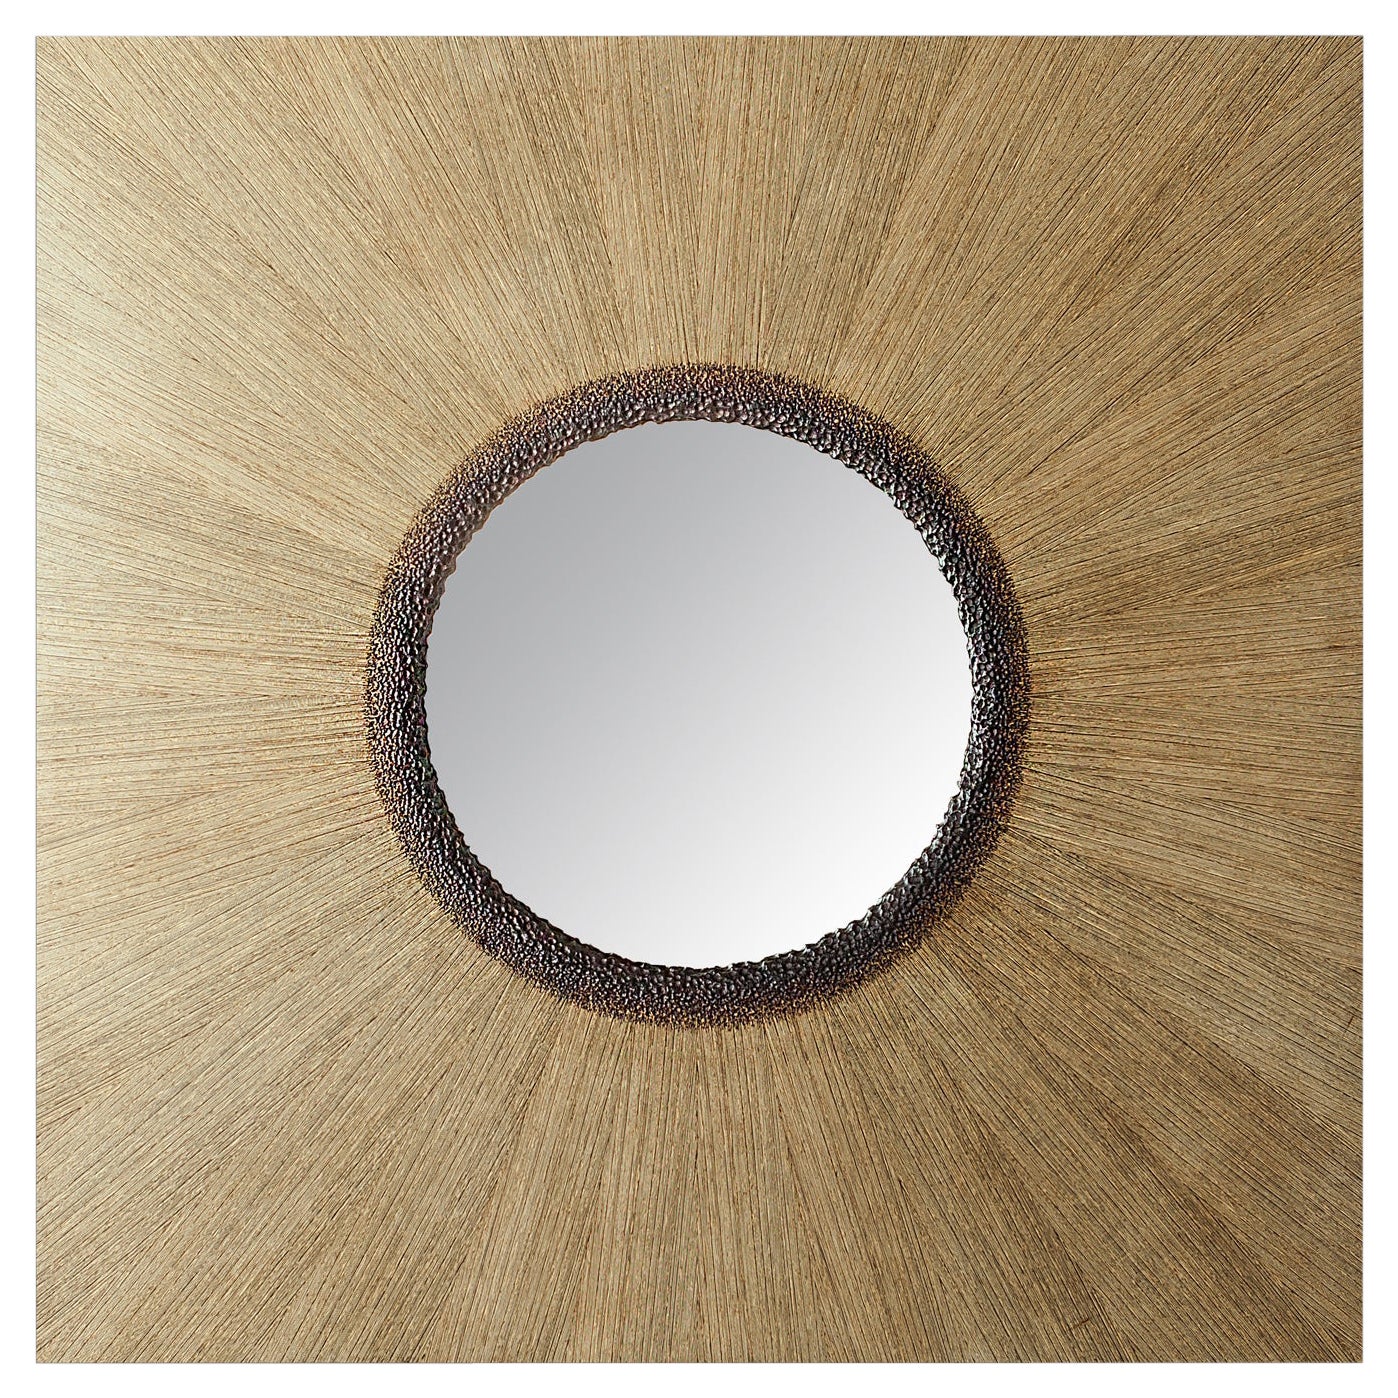 Into The Abyss, Sculptural Mirror, Hand Carved in Wenge, by David Tragen